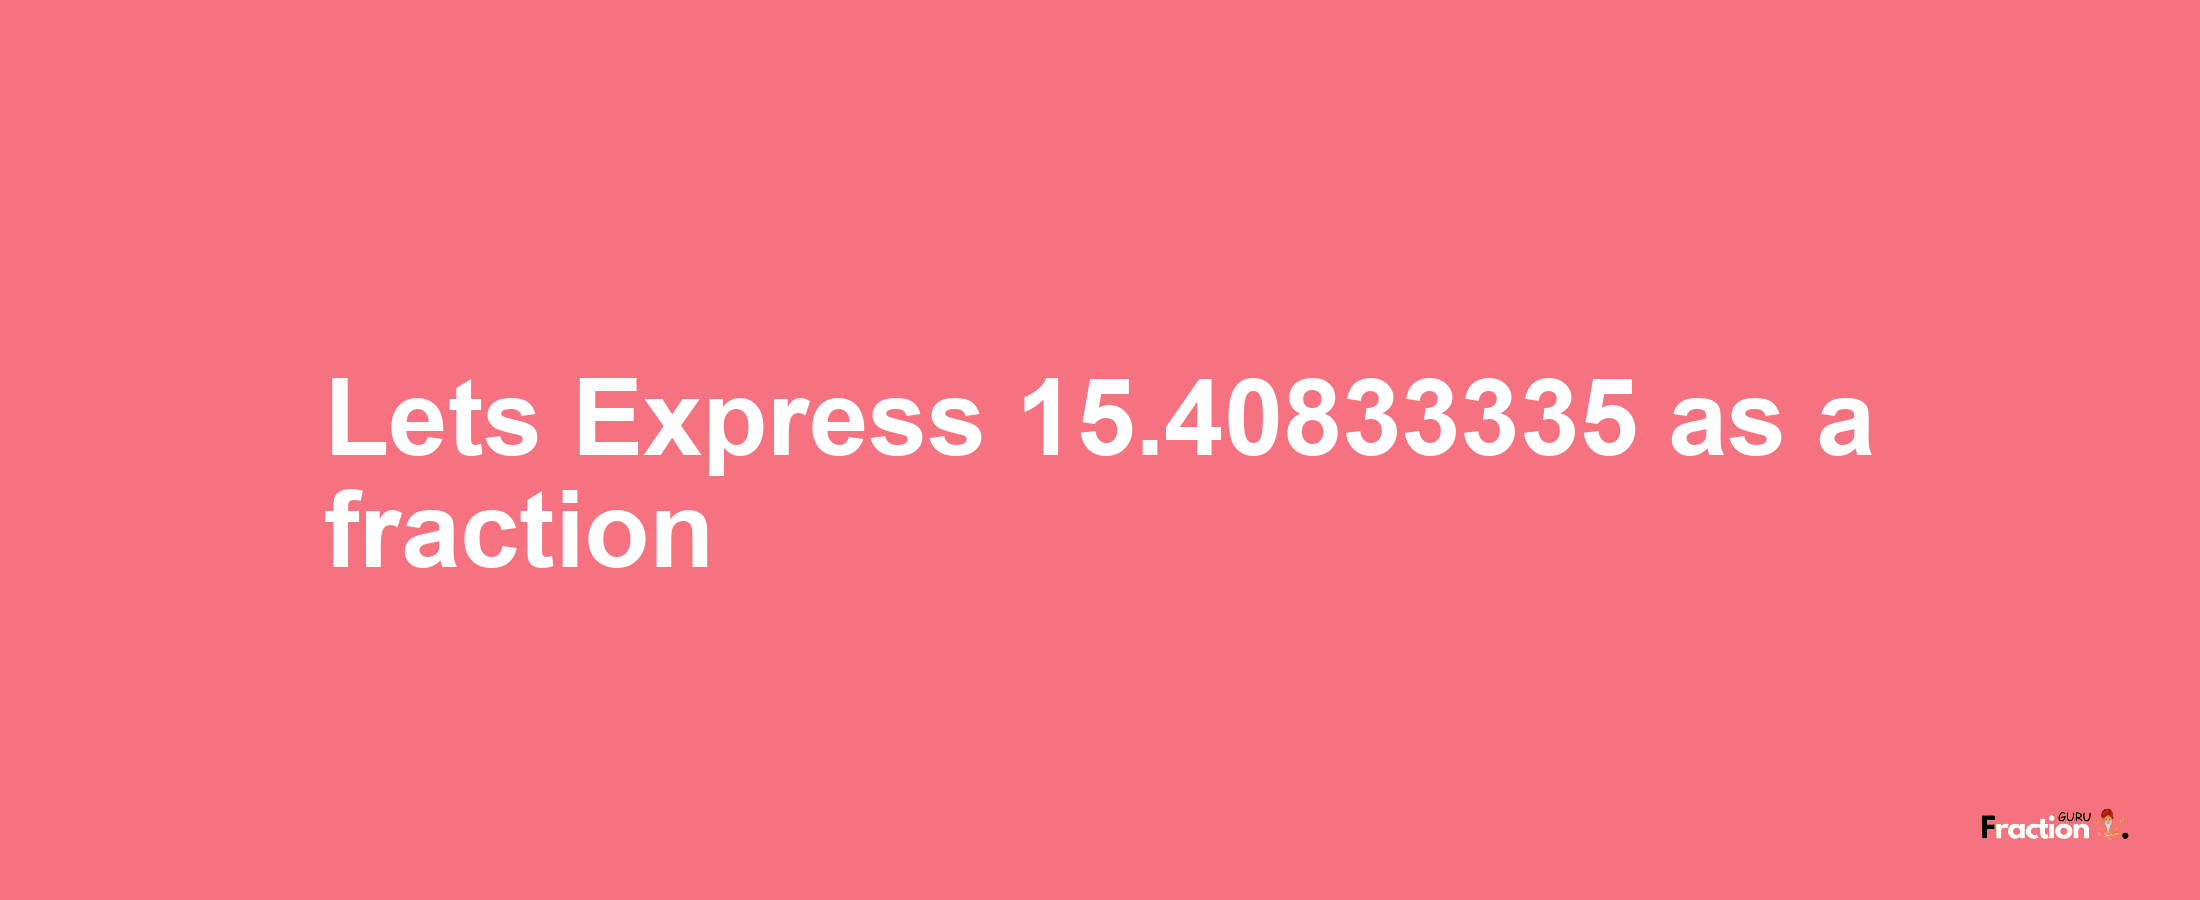 Lets Express 15.40833335 as afraction